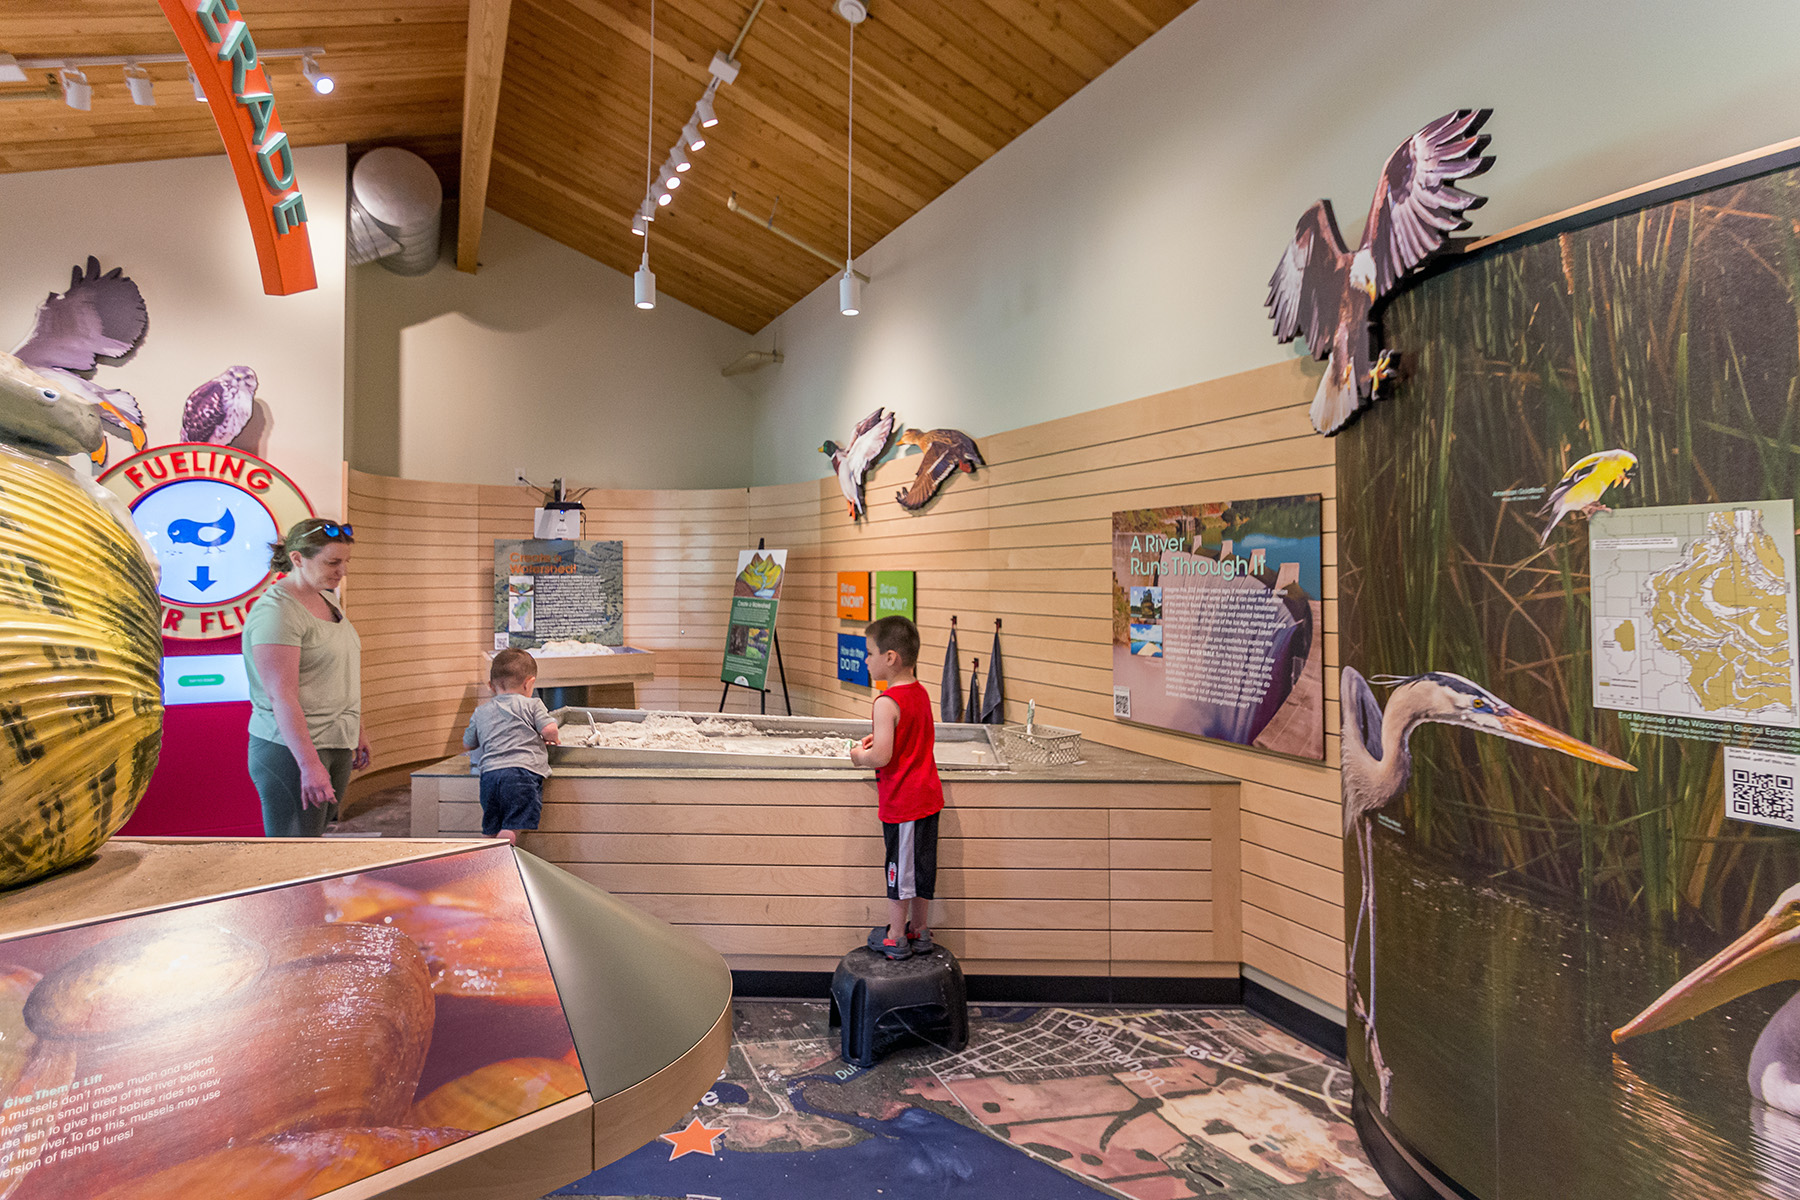 Cylinder downlights provide general lighting over an interactive exhibit for children at the Four Rivers Environmental Education Center, while LED track lights illuminate wall displays about local wildlife.